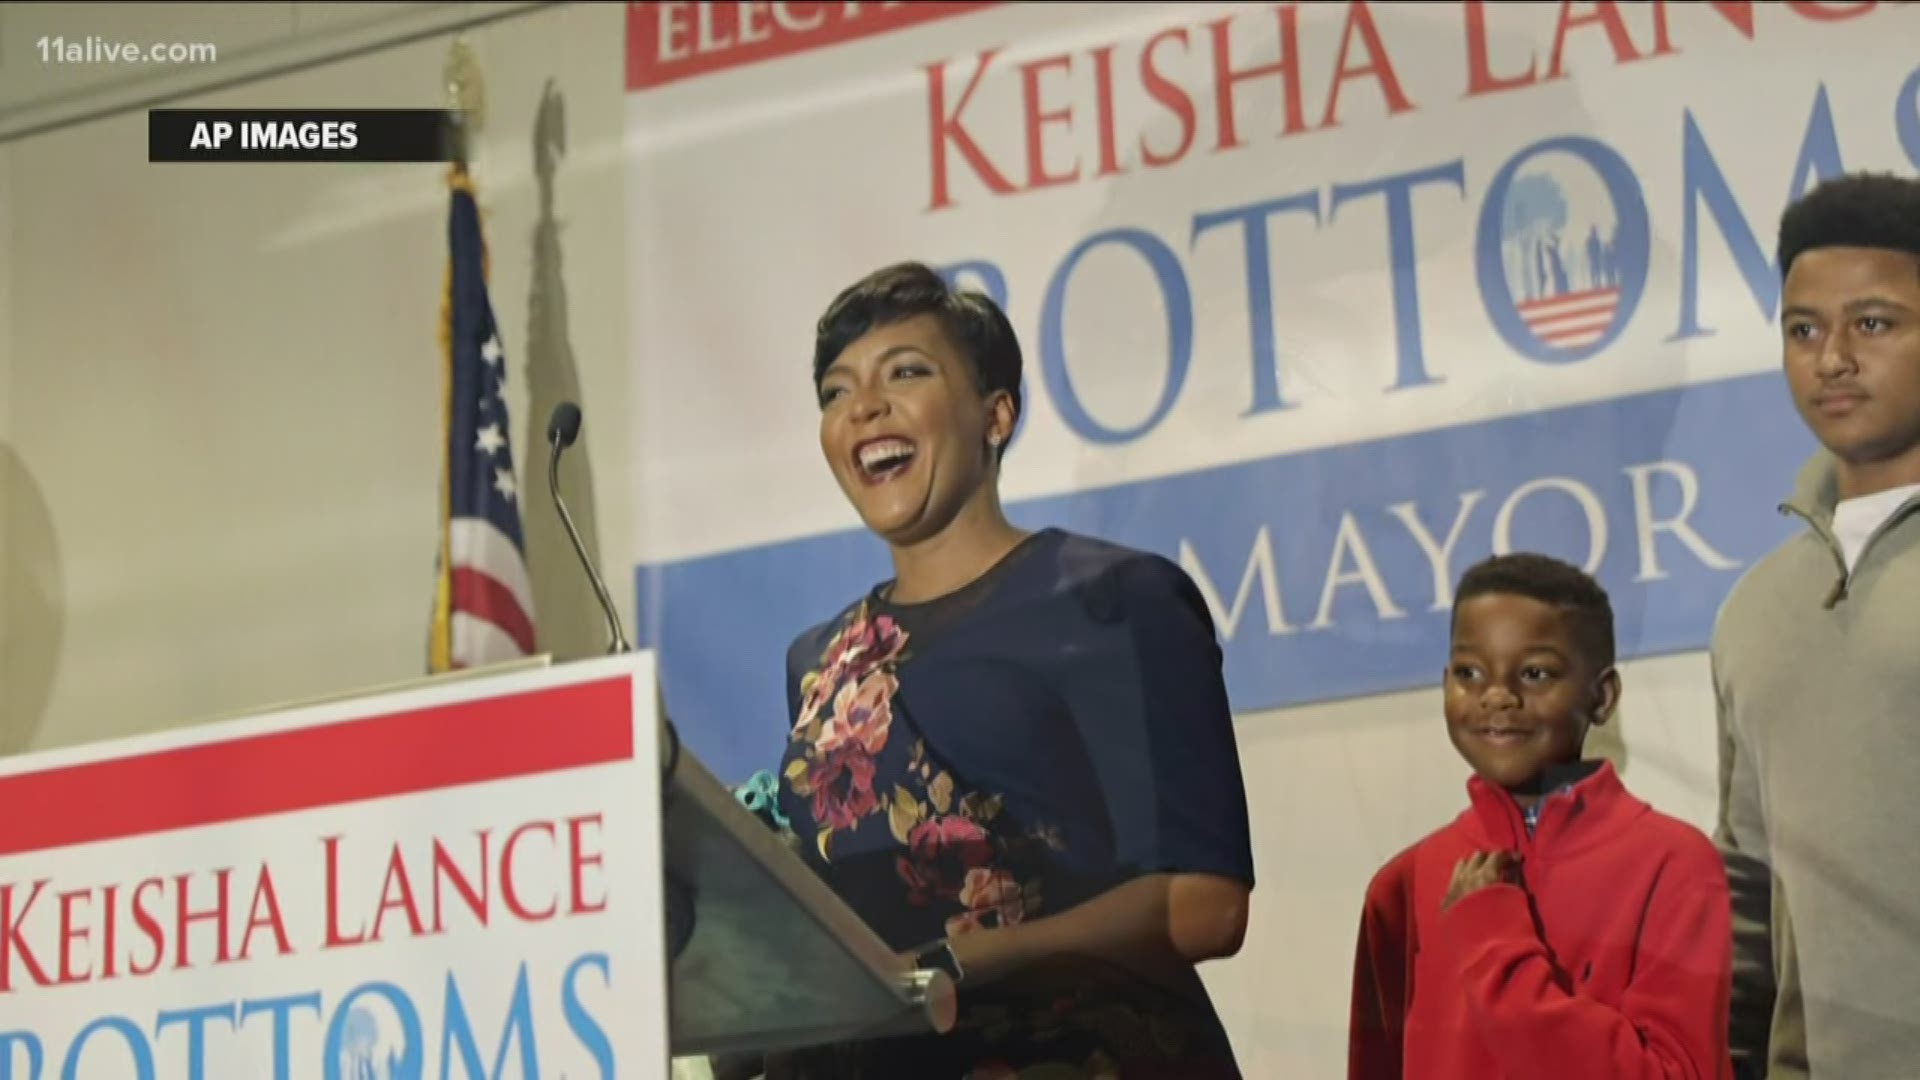 Atlanta Mayor Keisha Lance Bottoms will seek a second term when she is up for re-election in 2021, a spokesperson confirmed on Friday.